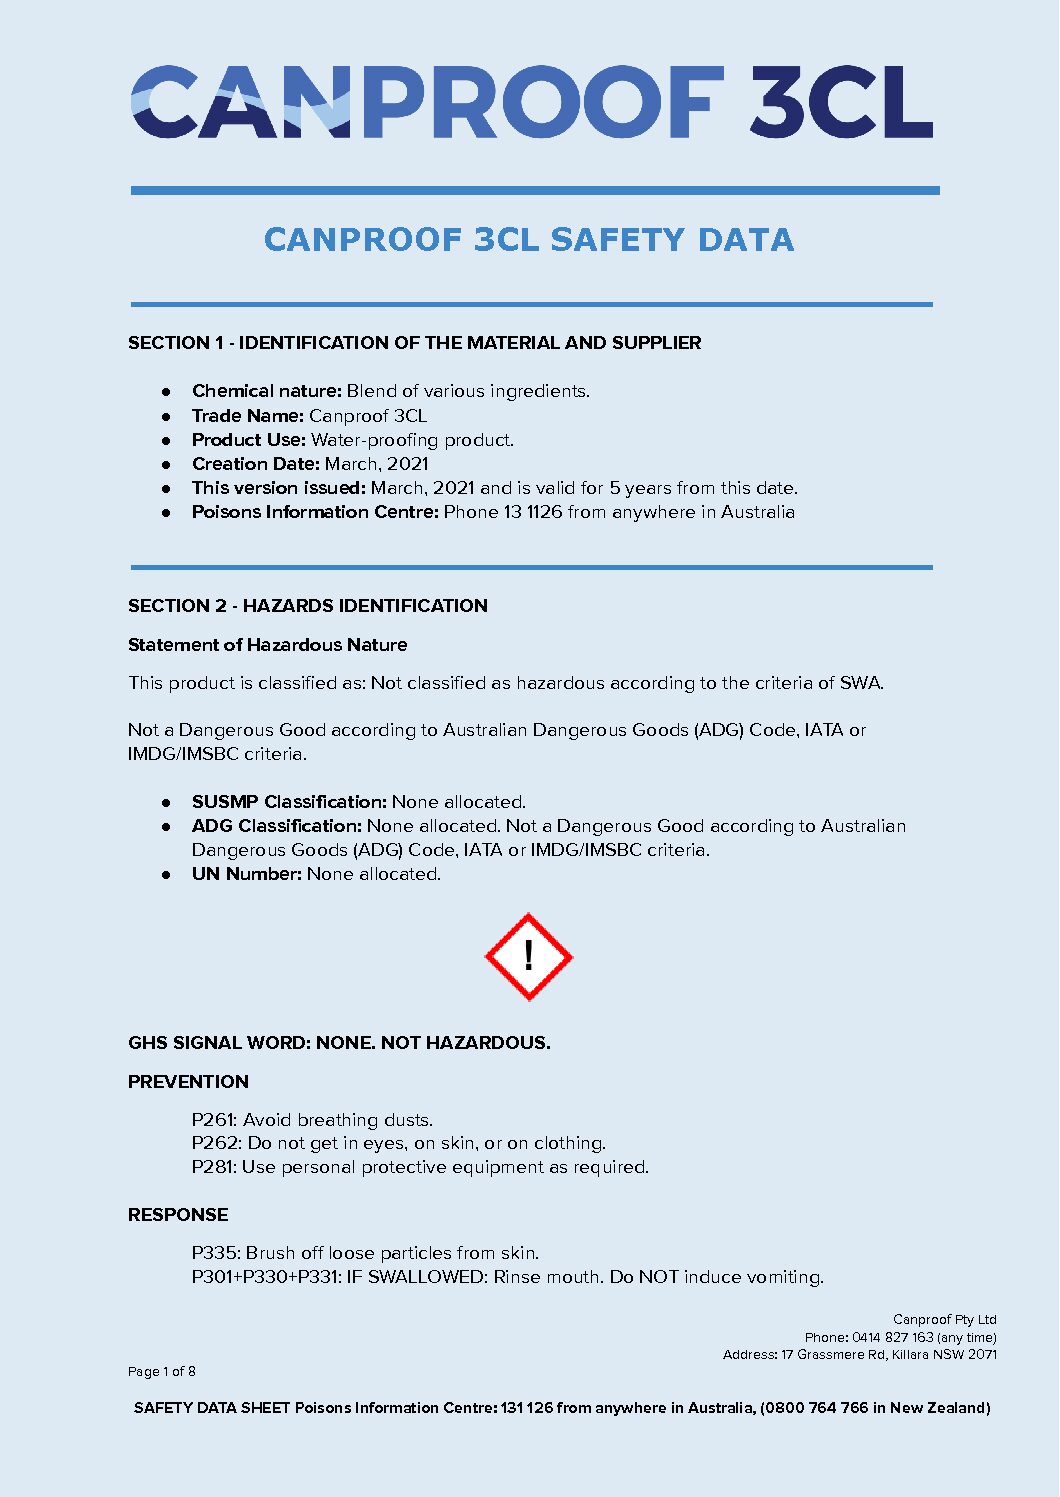 Canproof 3CL SDS